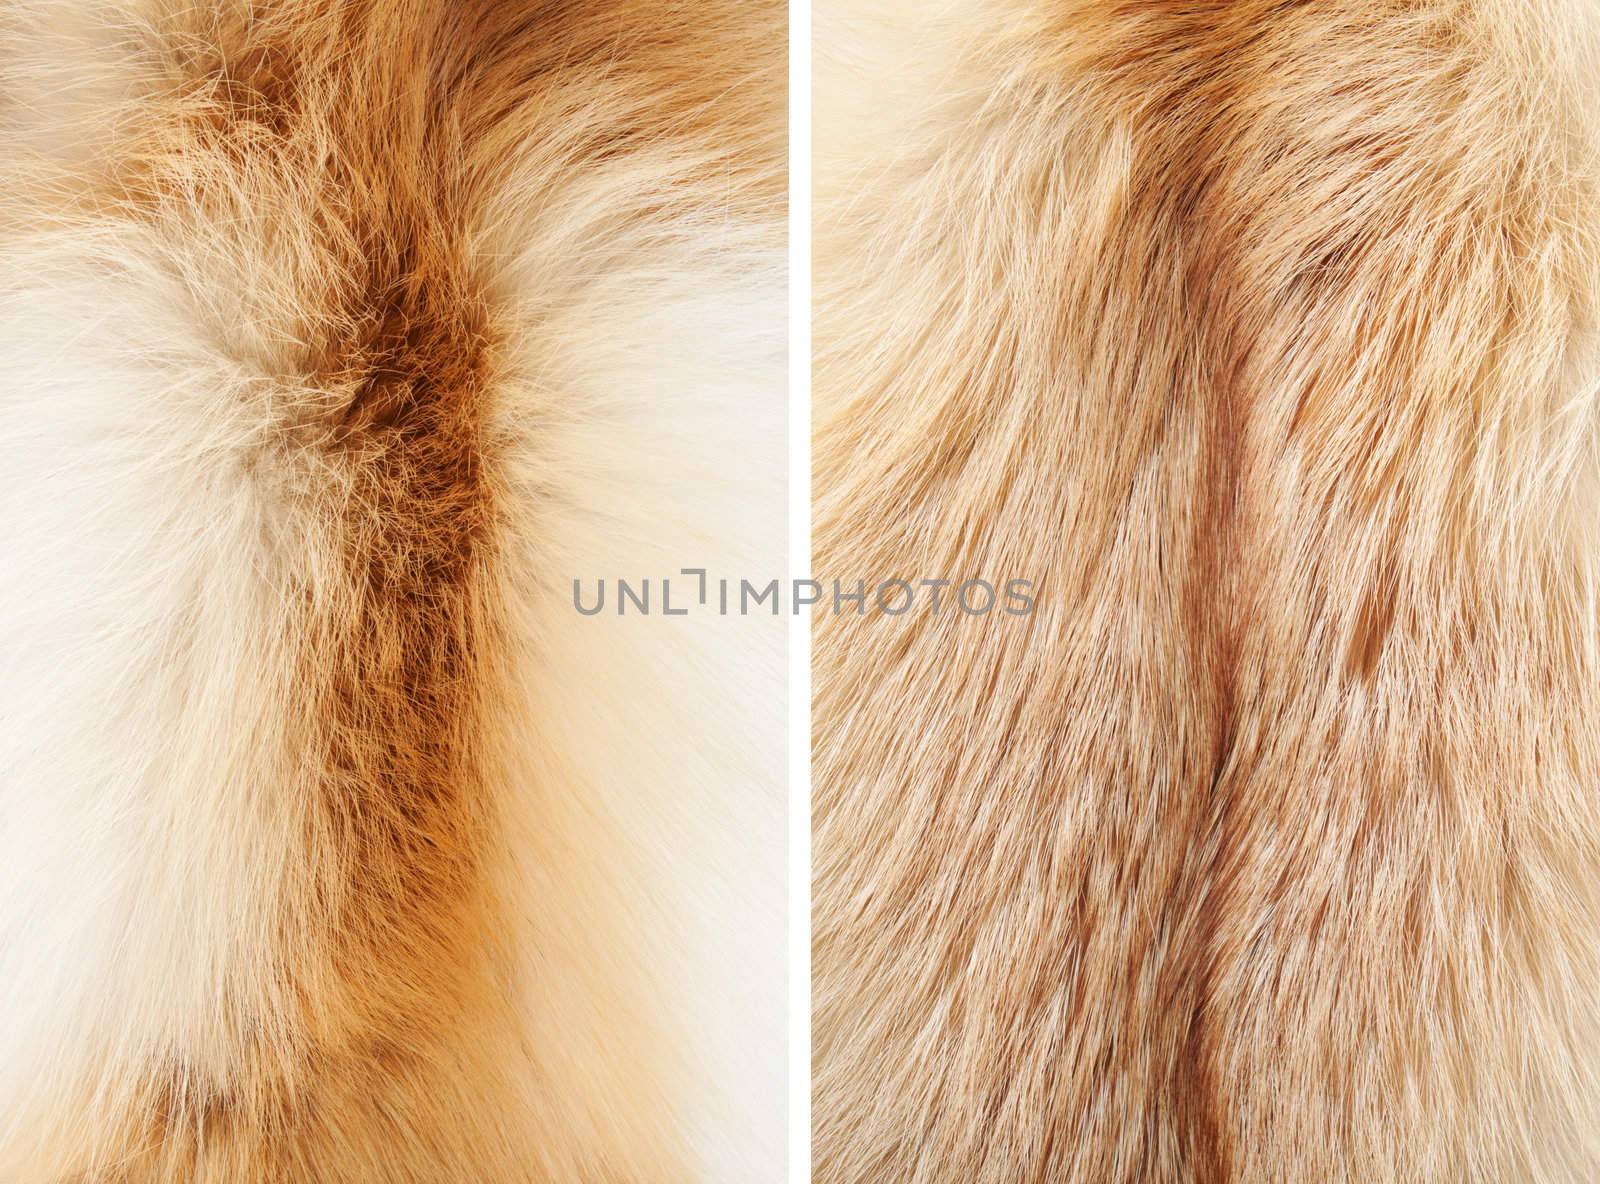 Long winter fur of the two yeared fox. 1st from the neck and 2nd from the back. Two types of fur texture